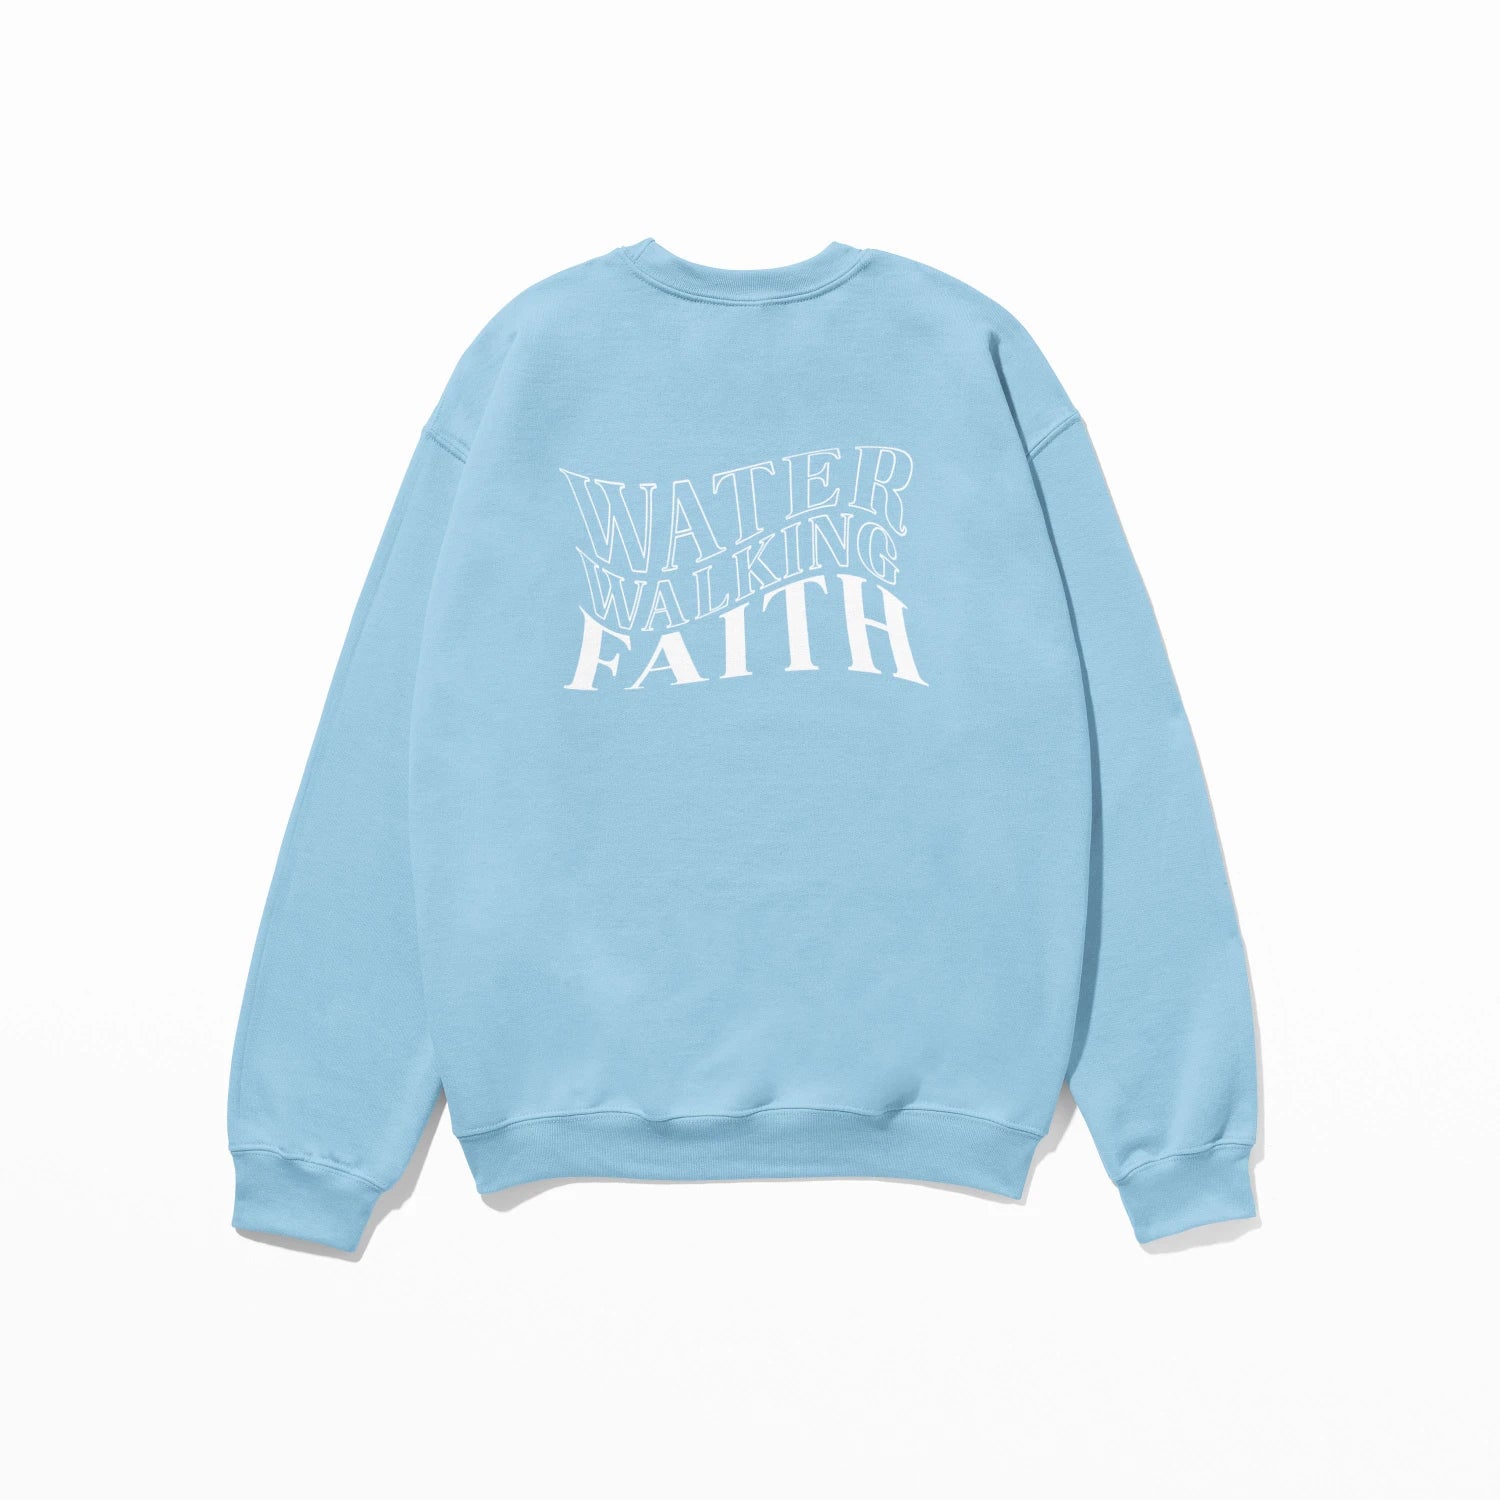 A blue "Water Walking Faith Sweatshirt" with white text on it that reads "Water Walking Faith" by Be Still and Know.